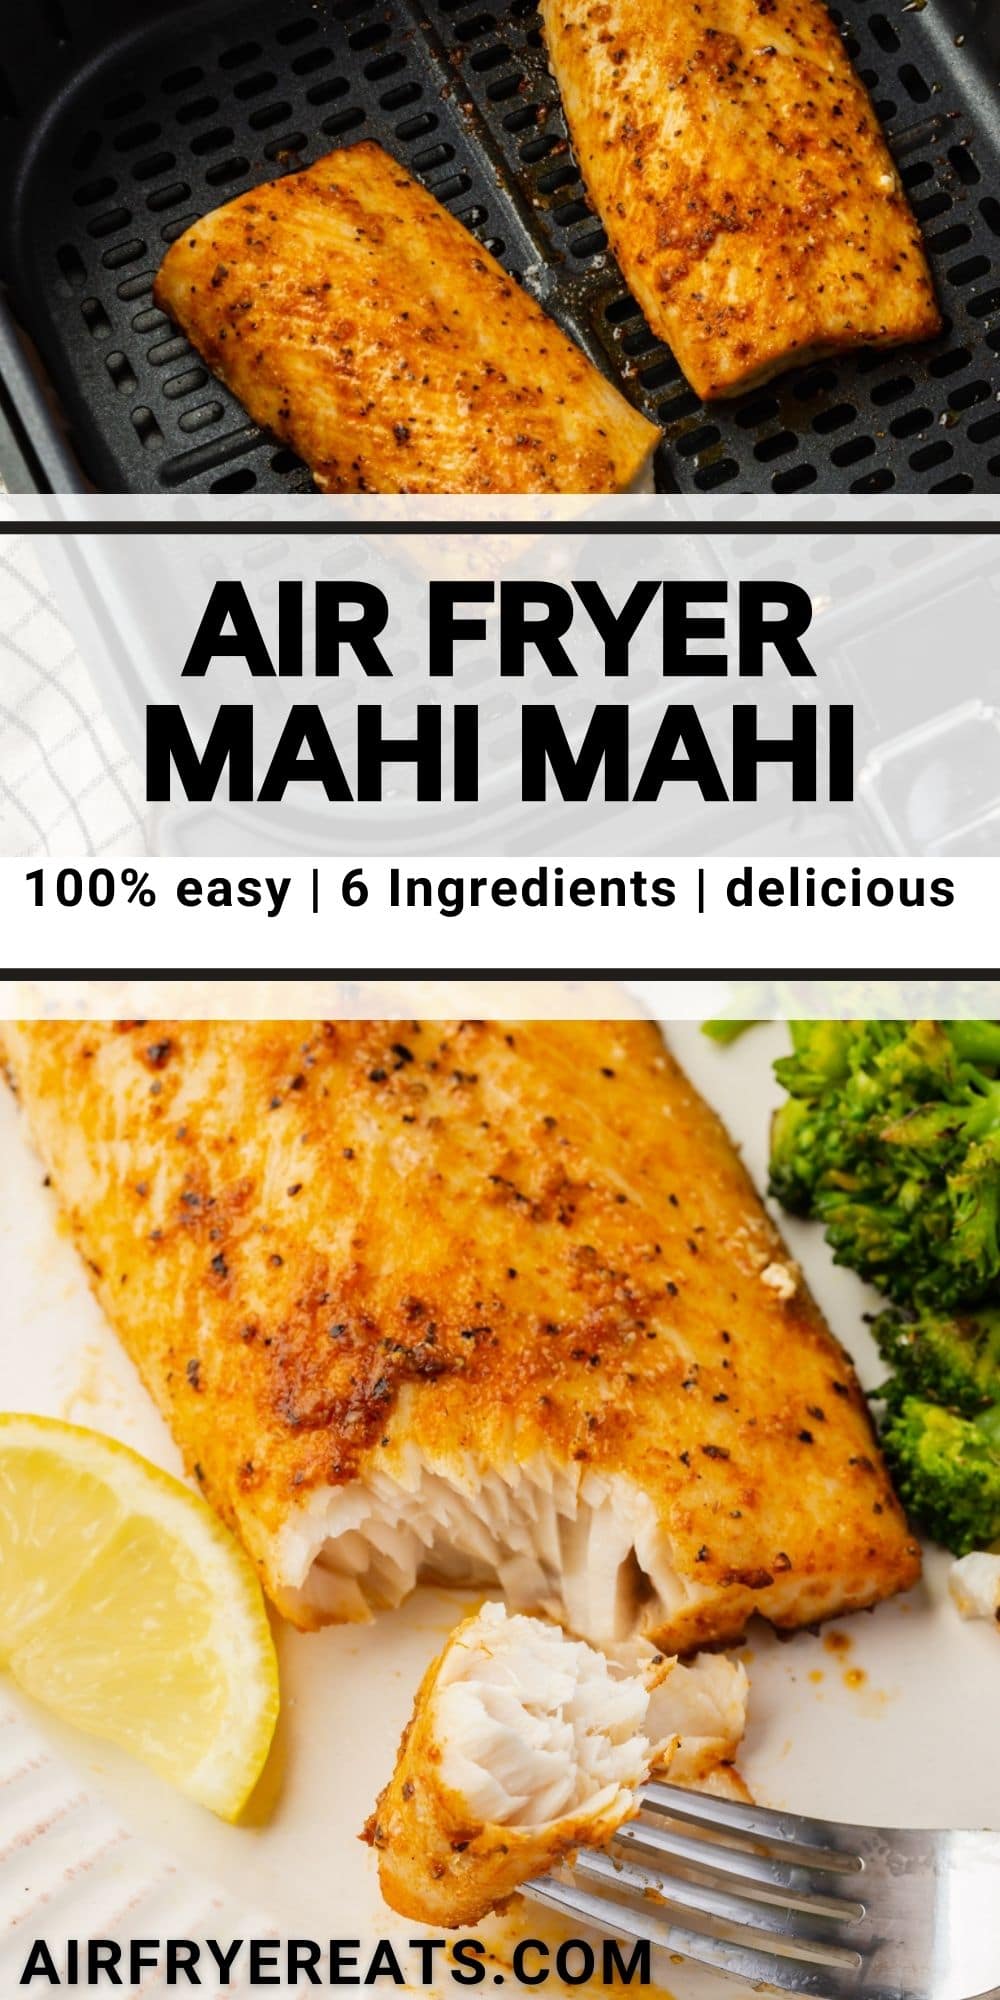 Make perfectly cooked, tasty, and healthy Air Fryer Mahi Mahi in just a few minutes with this easy air fryer recipe! via @vegetarianmamma